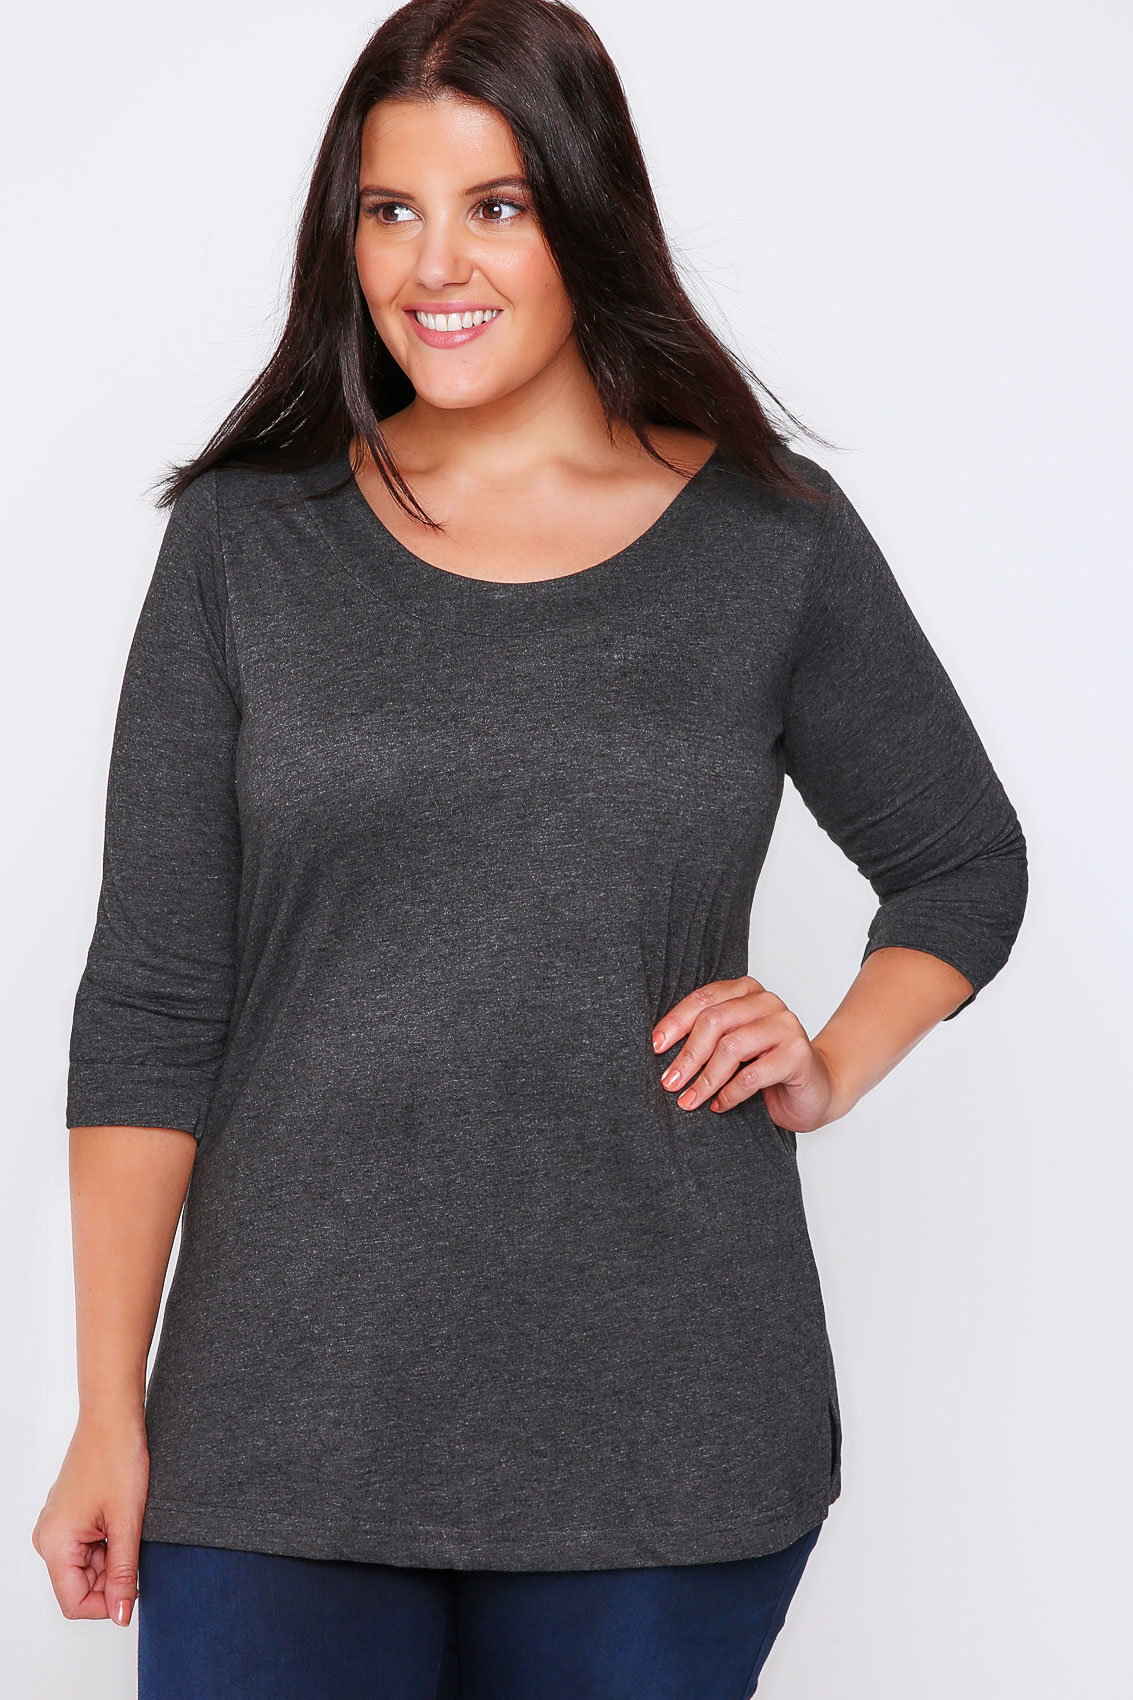 Dark Grey Band Scoop Neckline T-Shirt With 3/4 Sleeves plus Size 16 to 32